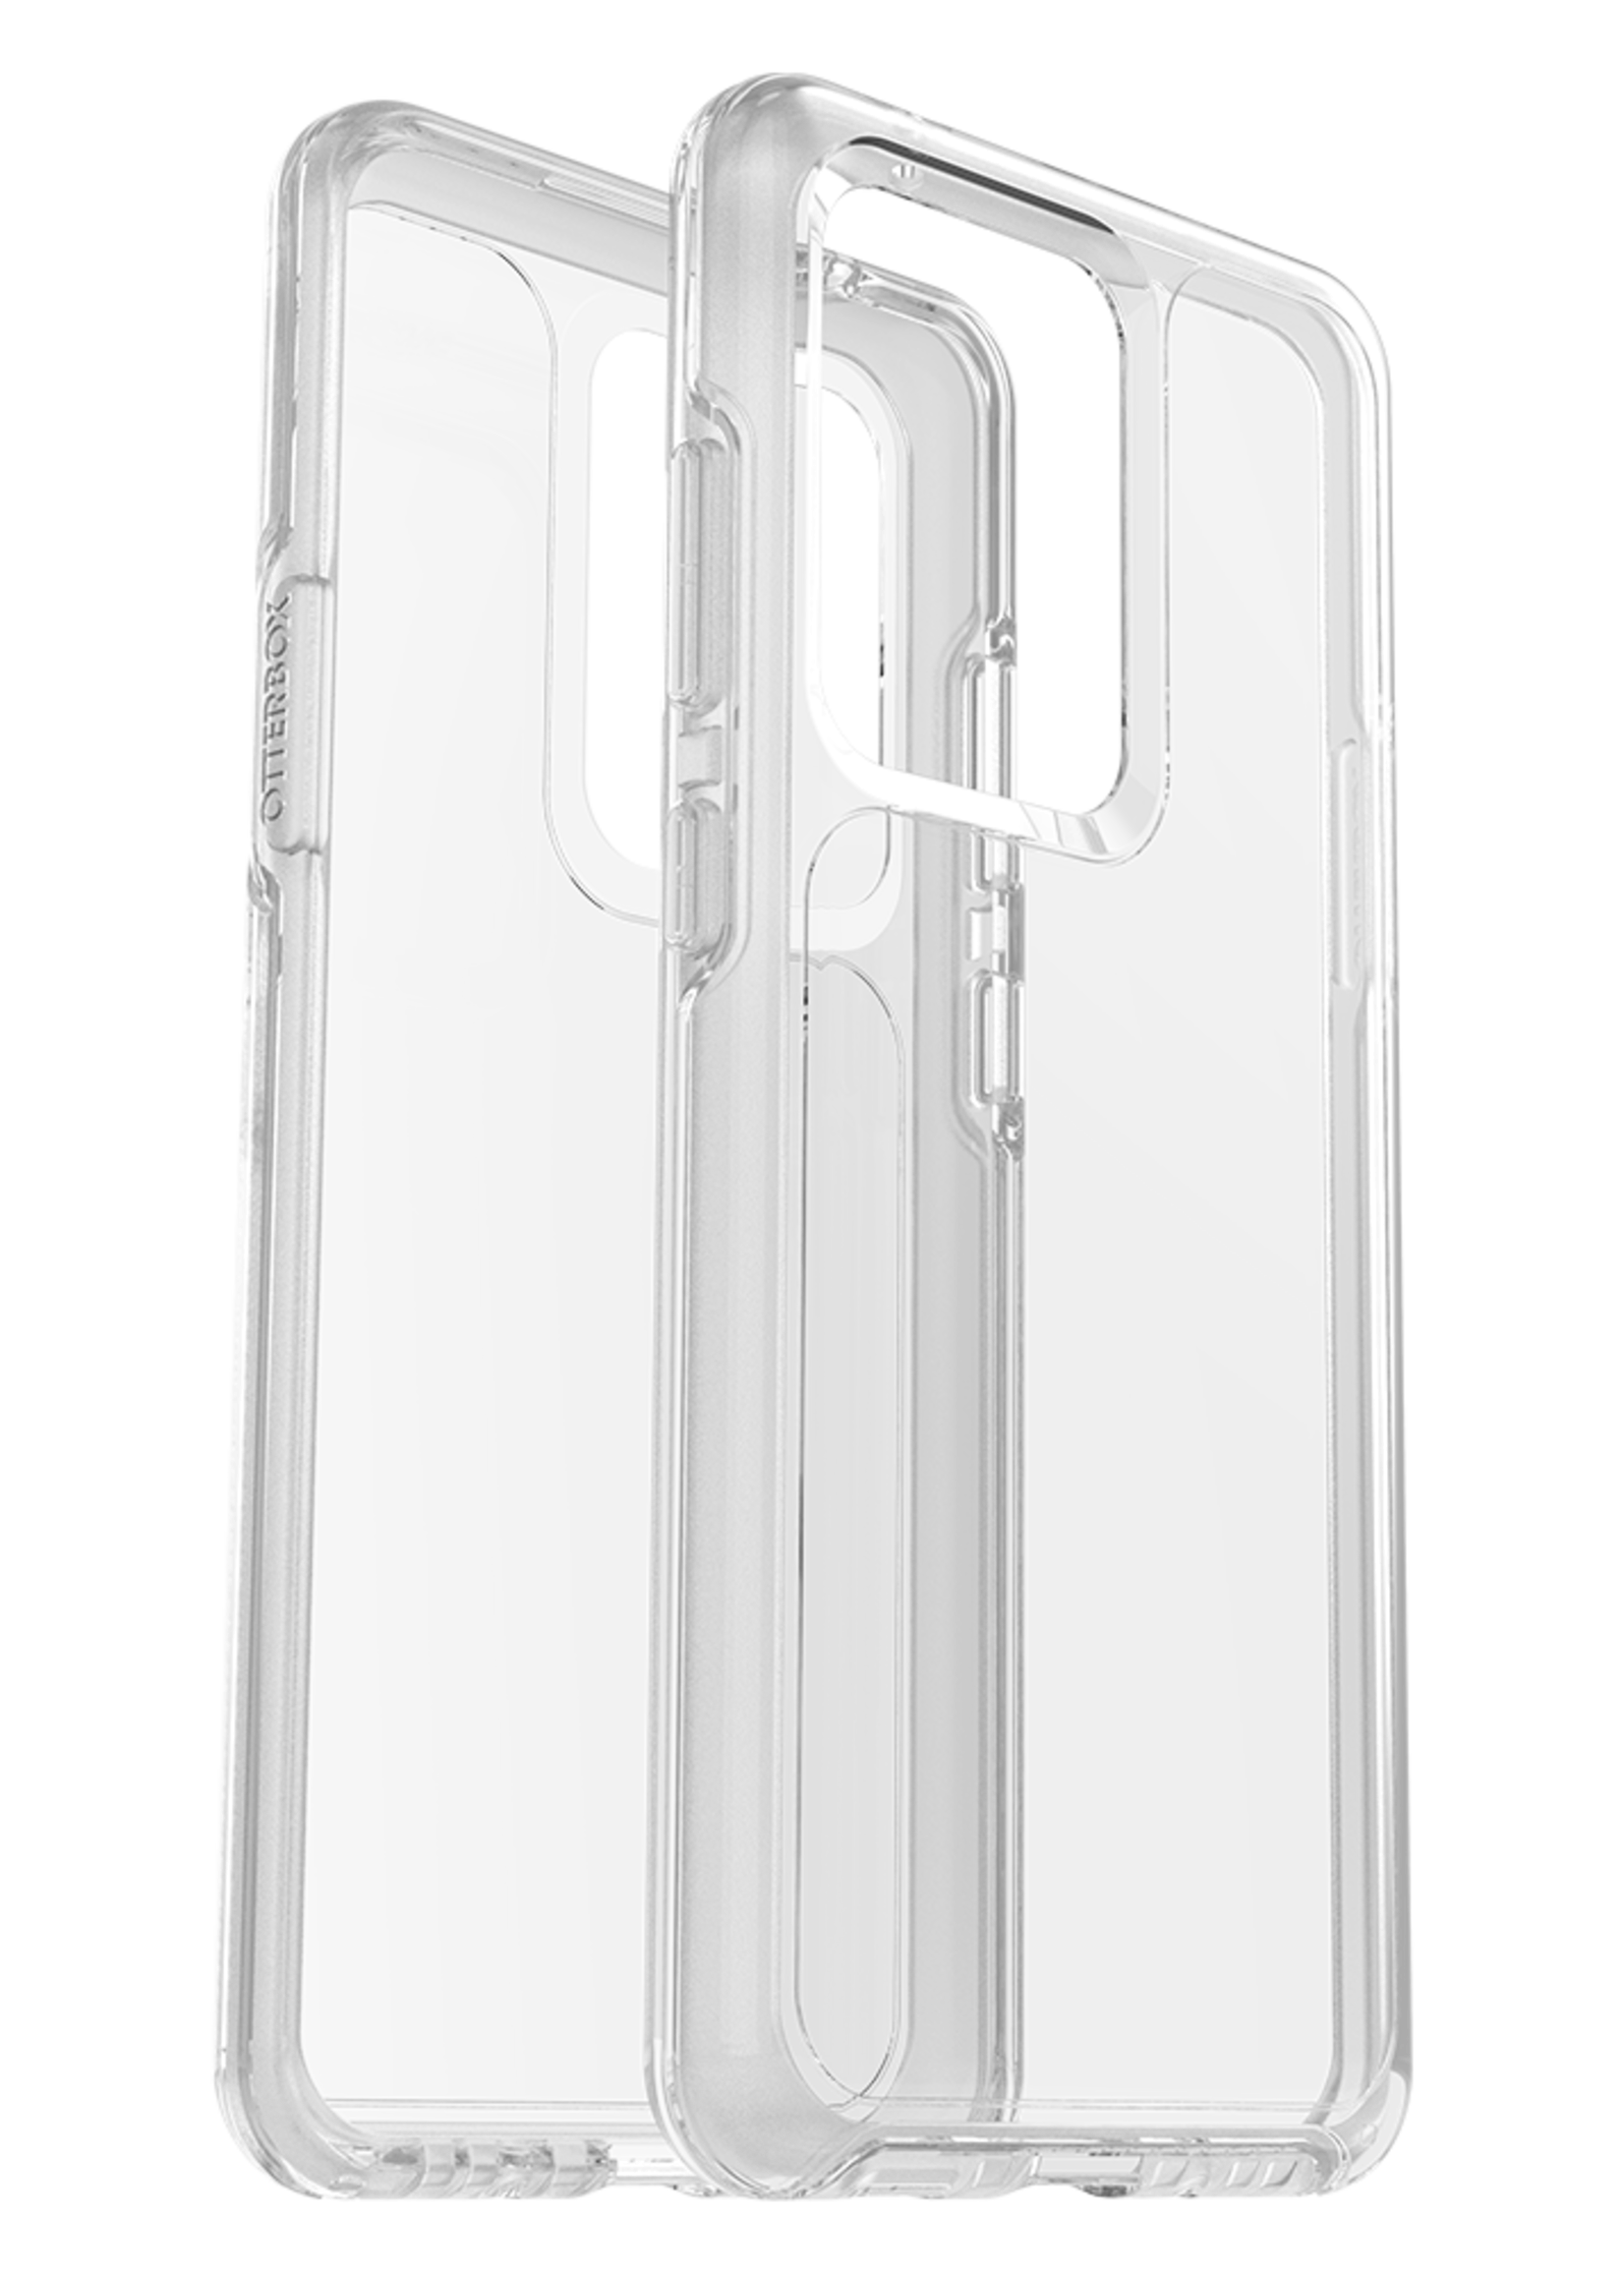 Otterbox OtterBox - Symmetry Clear Case for Samsung Galaxy S20 Ultra - Clear